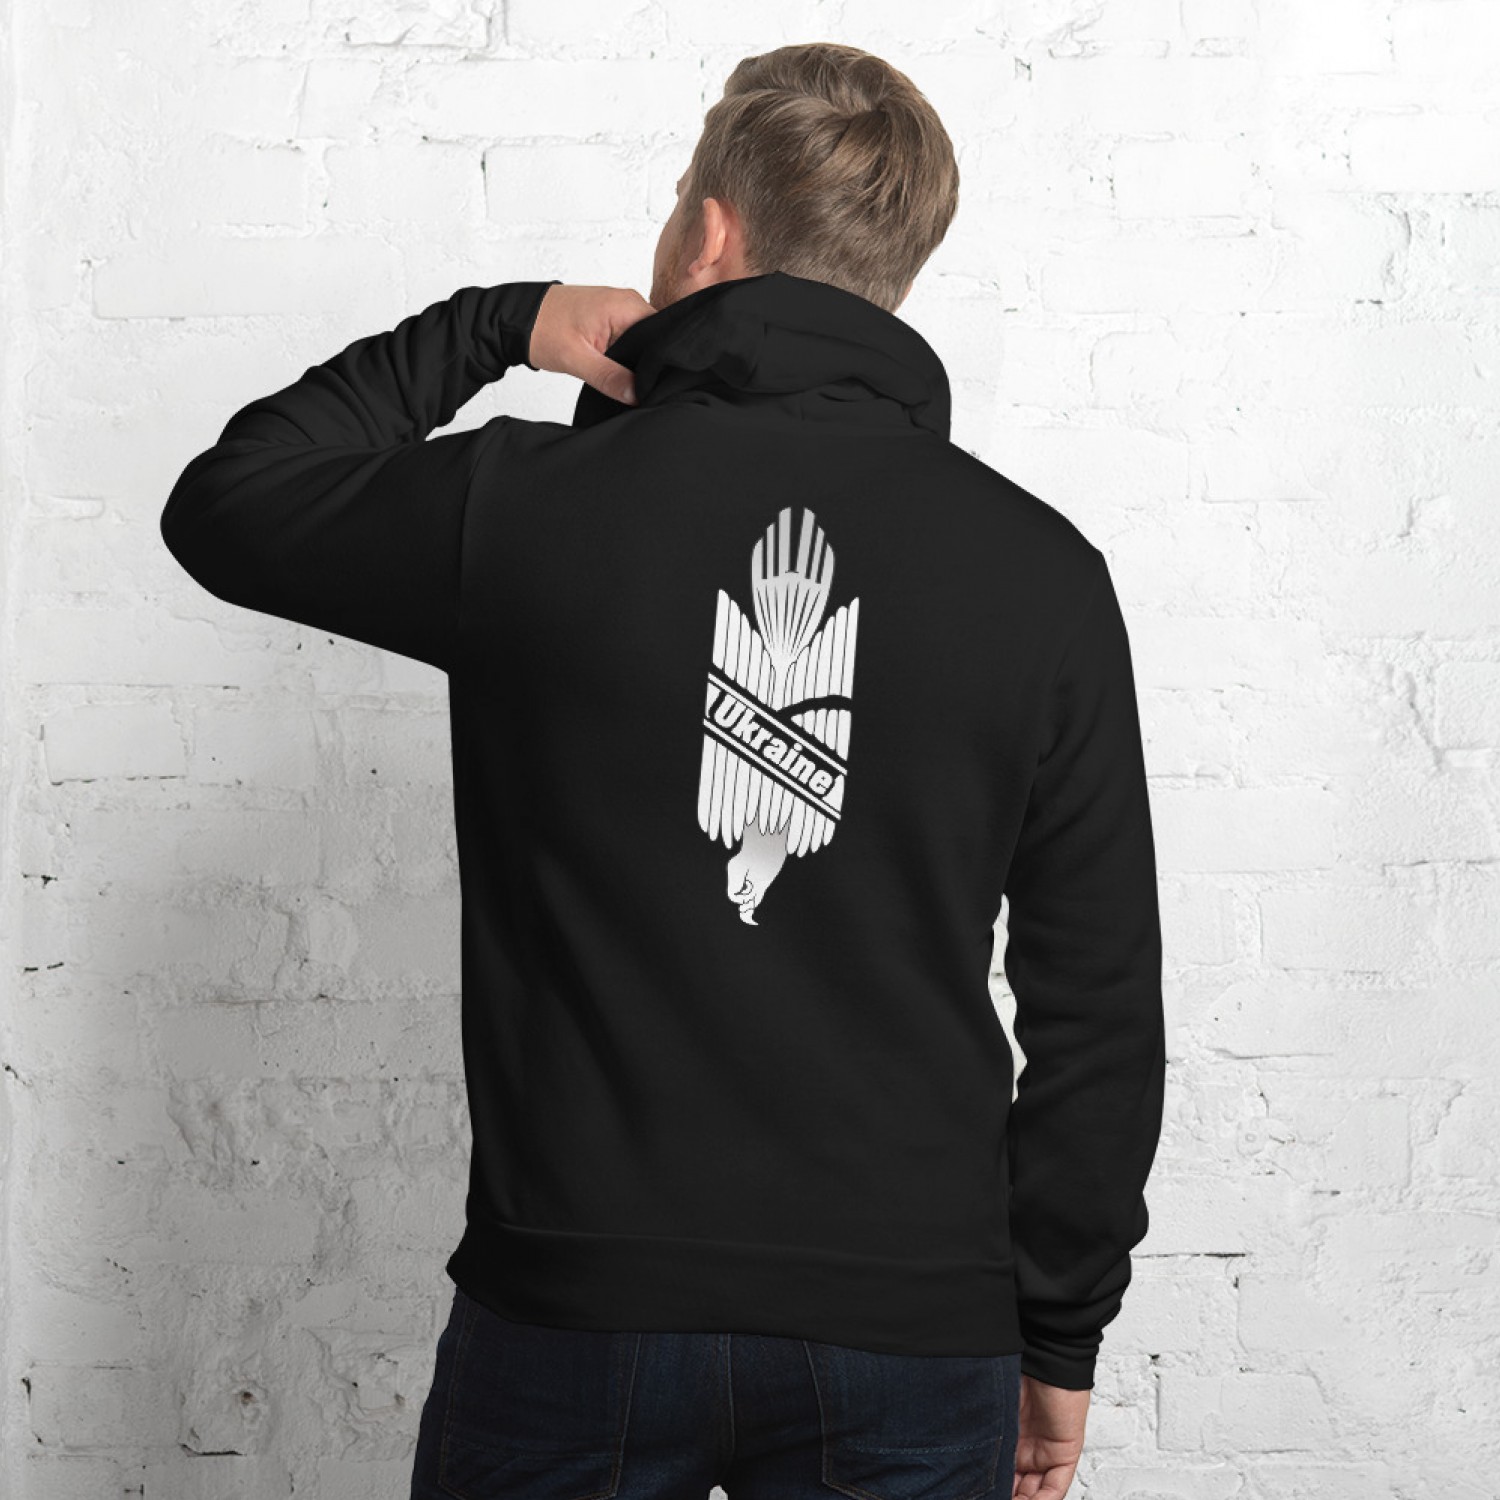 Buy Hoodie with a trident "Over Everything"